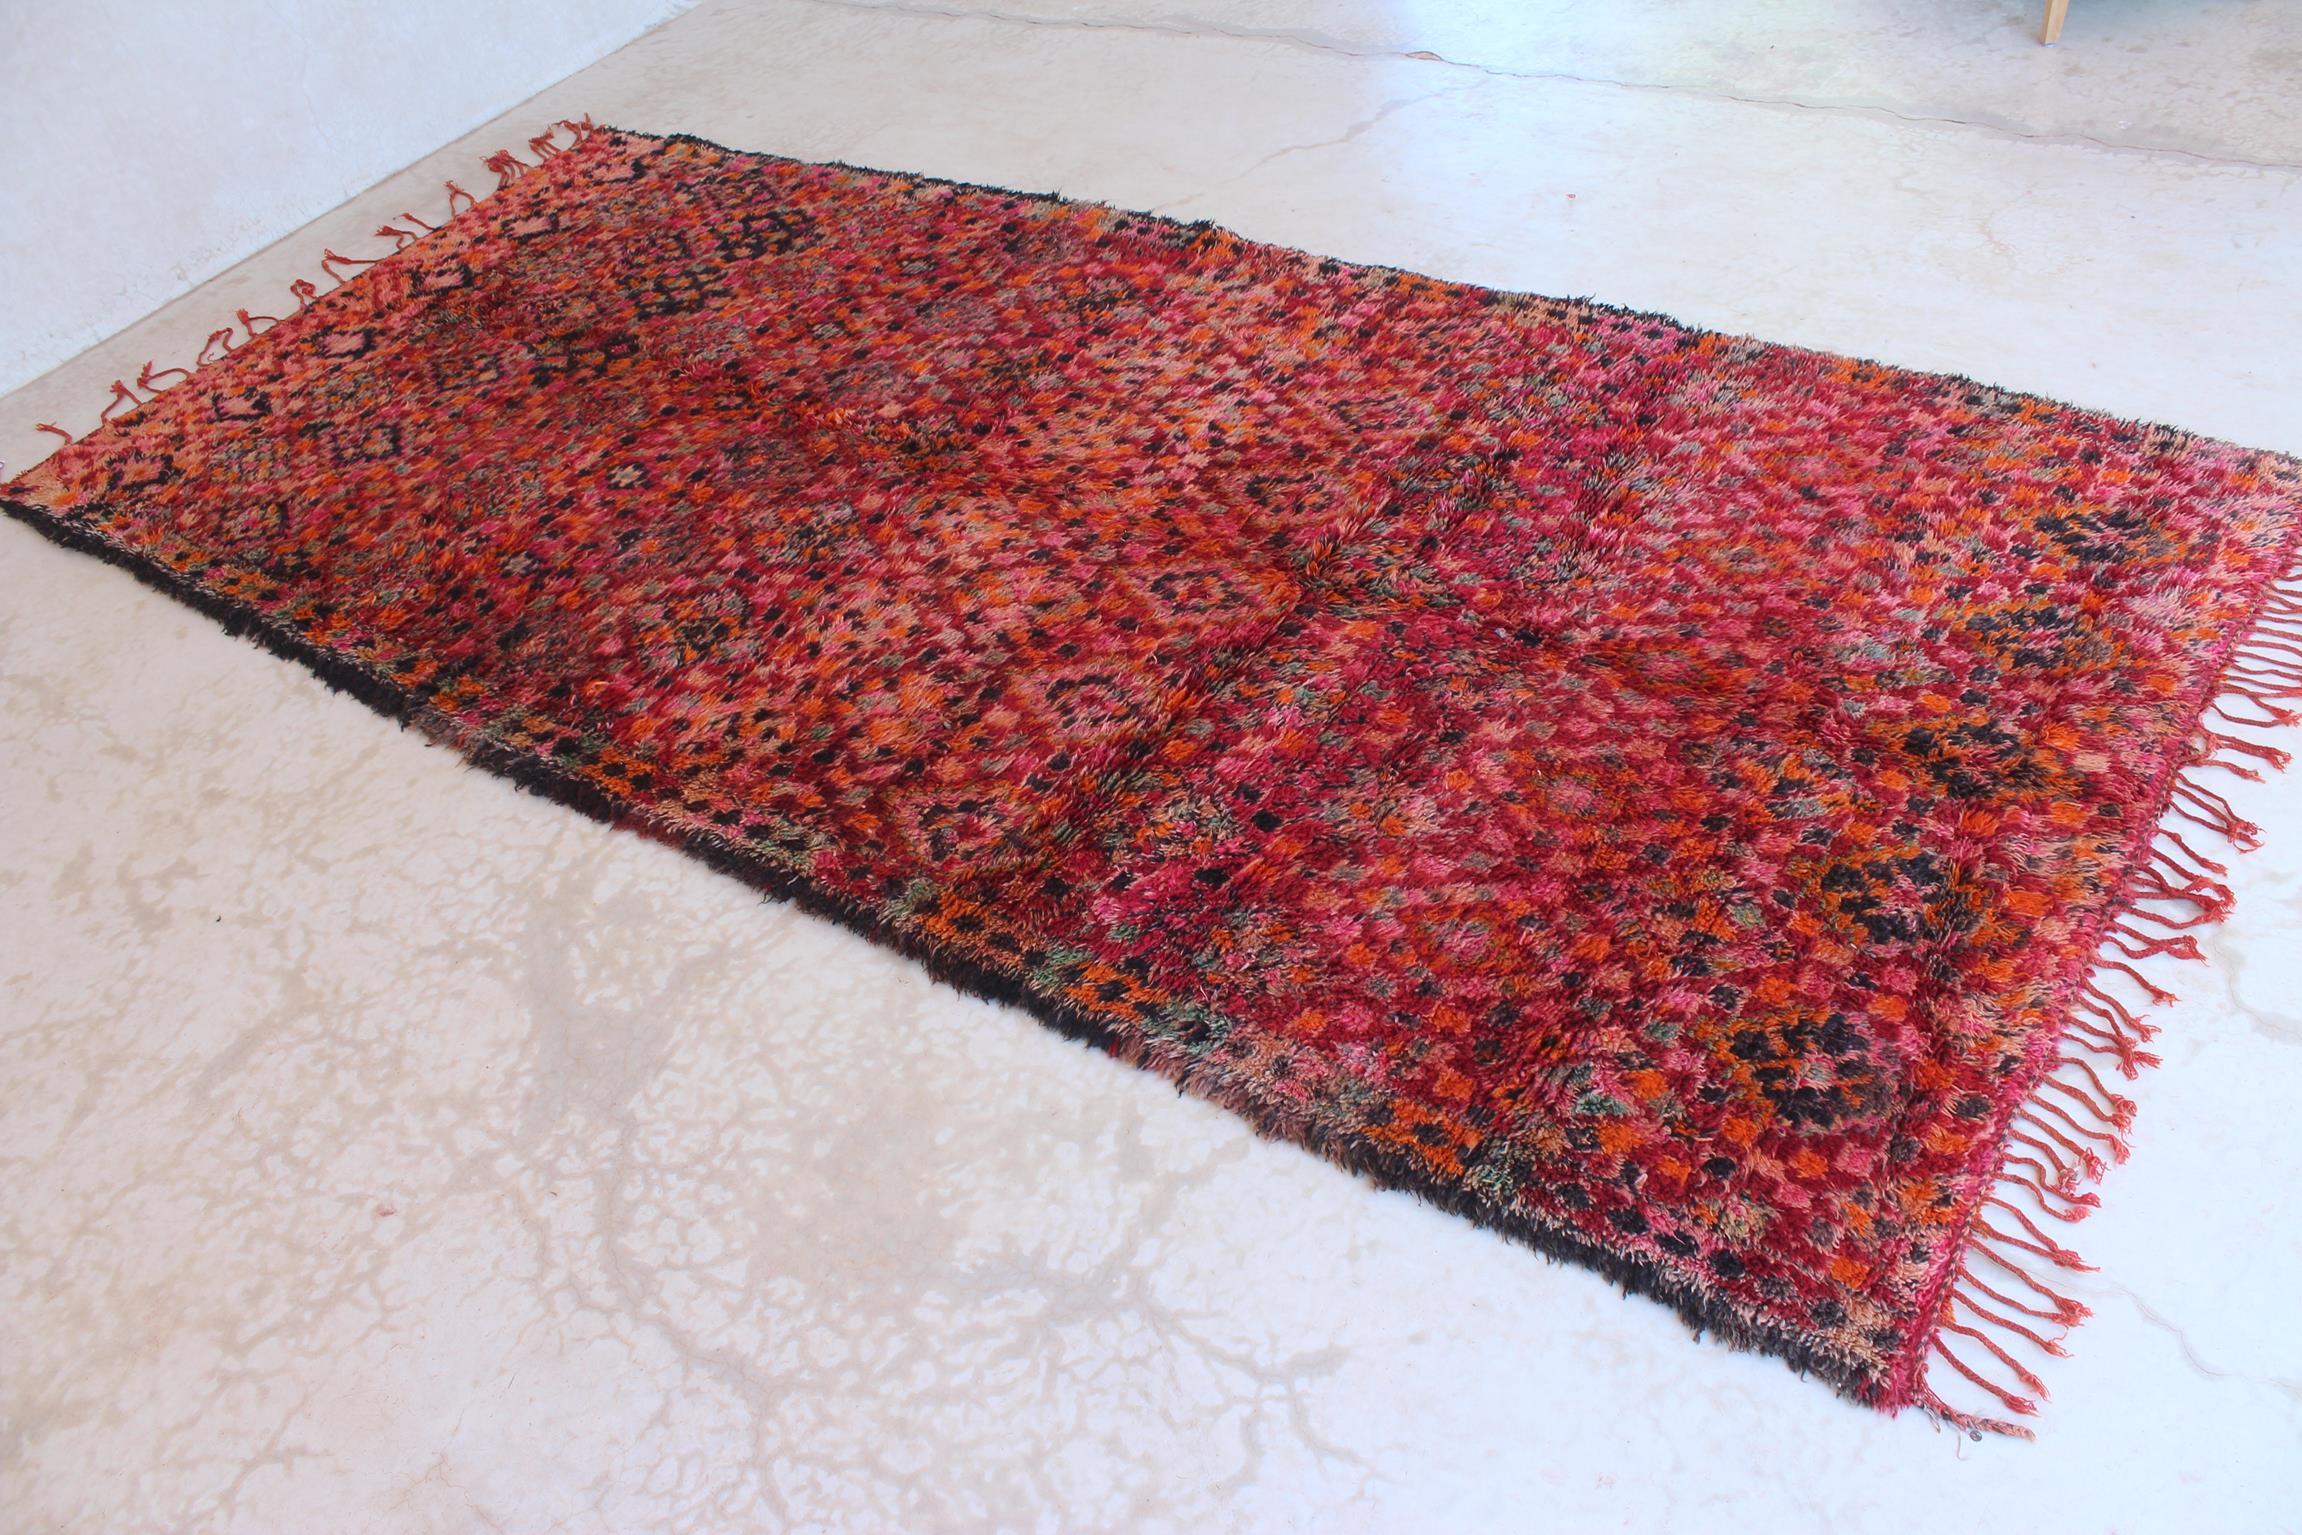 Tribal Vintage Moroccan Beni Mguild rug - Red - 6.5x14.3feet / 200x437cm For Sale